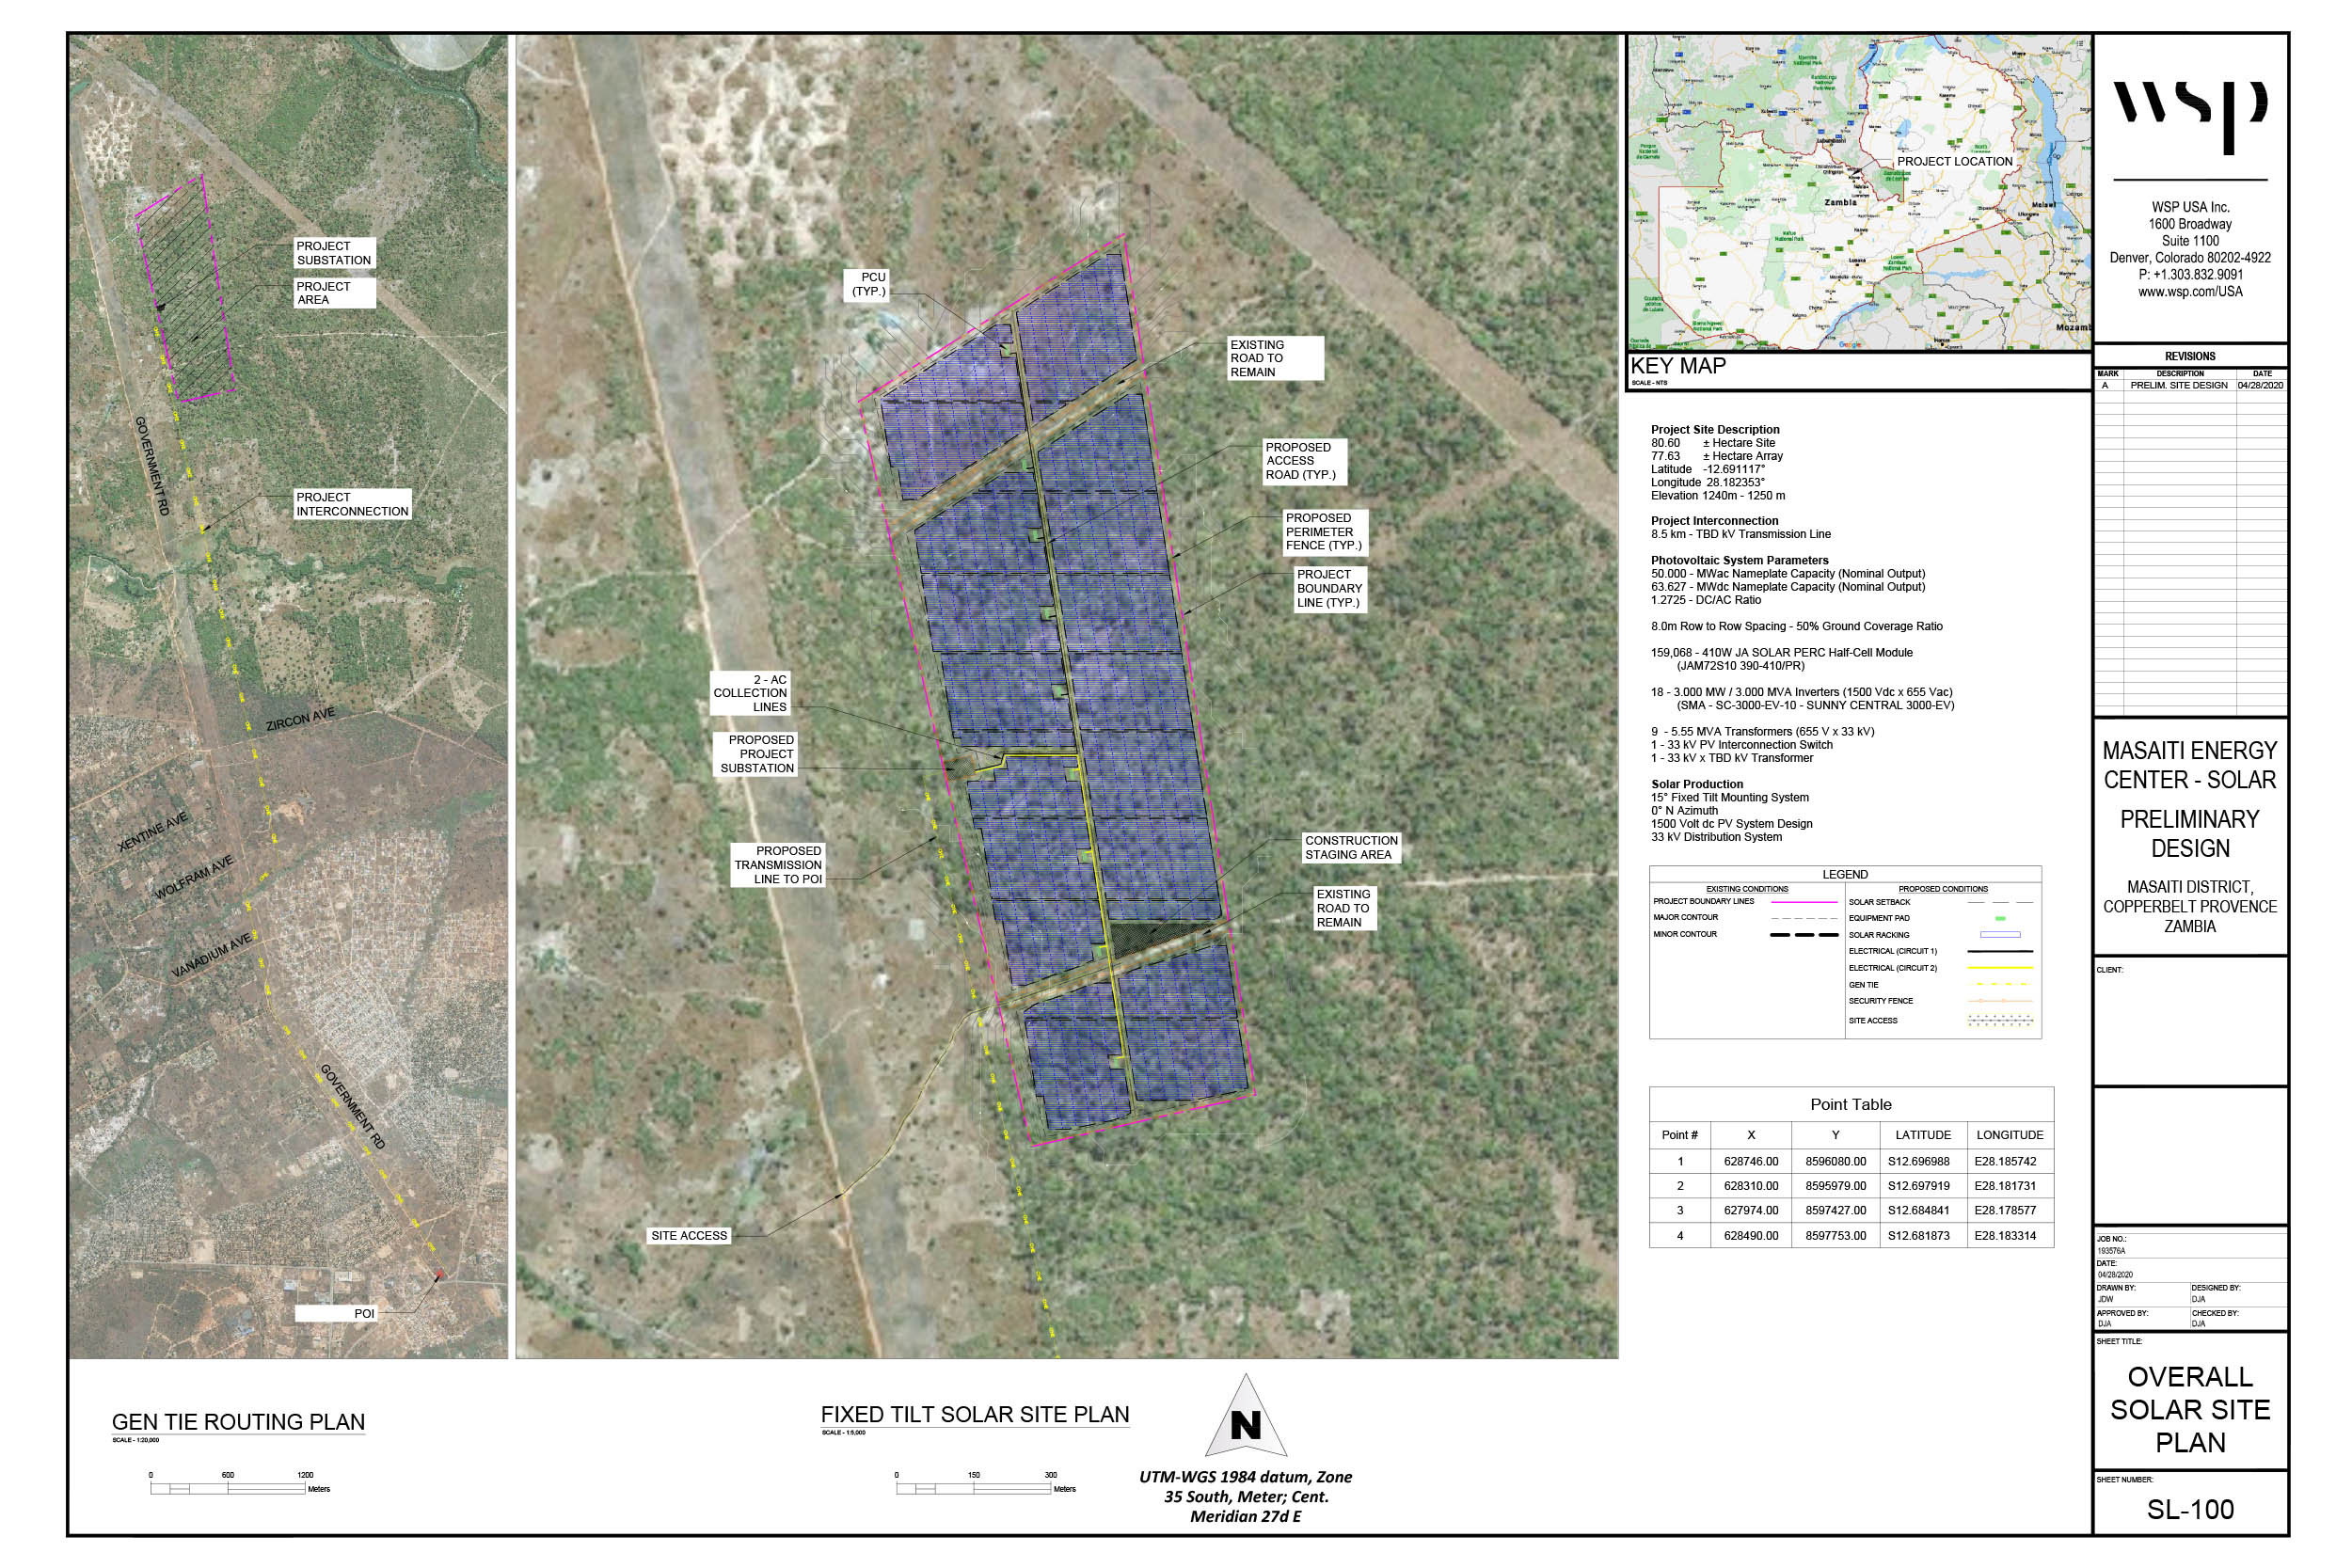 This is a preliminary solar farm and substation layout for the 50MW solar farm in Kitwe adjacent to a CEC right of way and near a CEC substation.